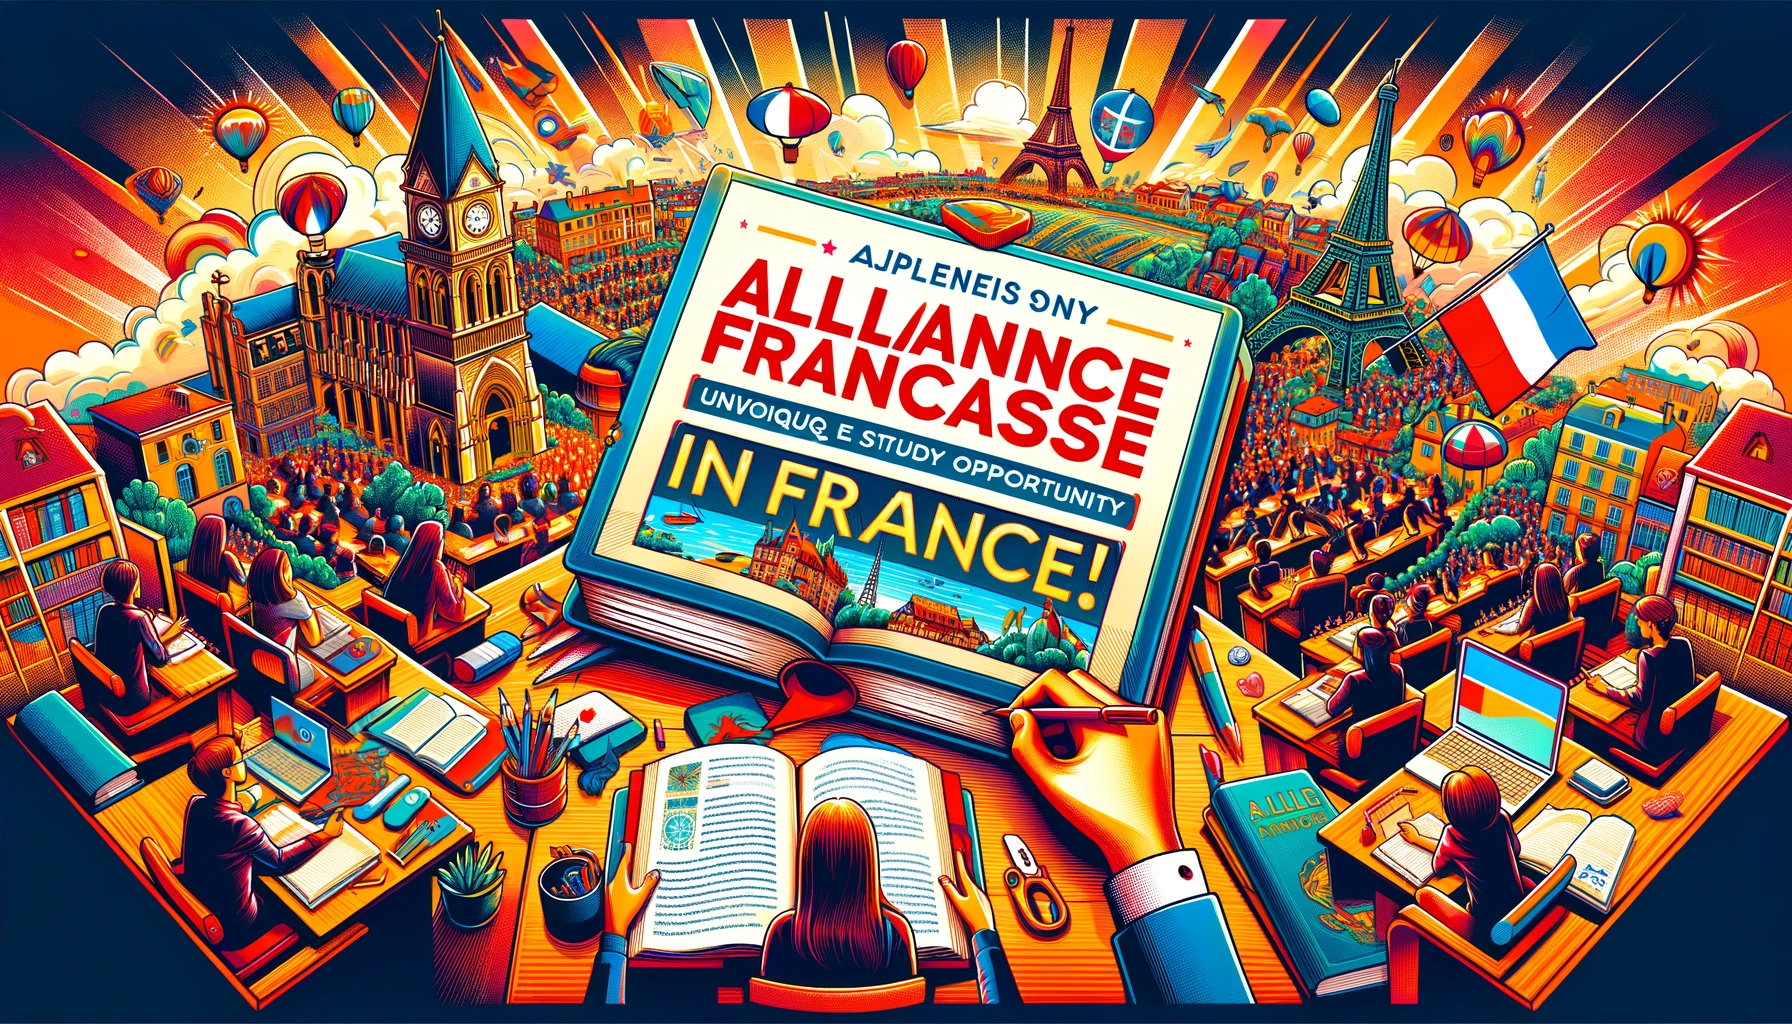 Alliance Francaise Unveils Unique Study Opportunity in France!